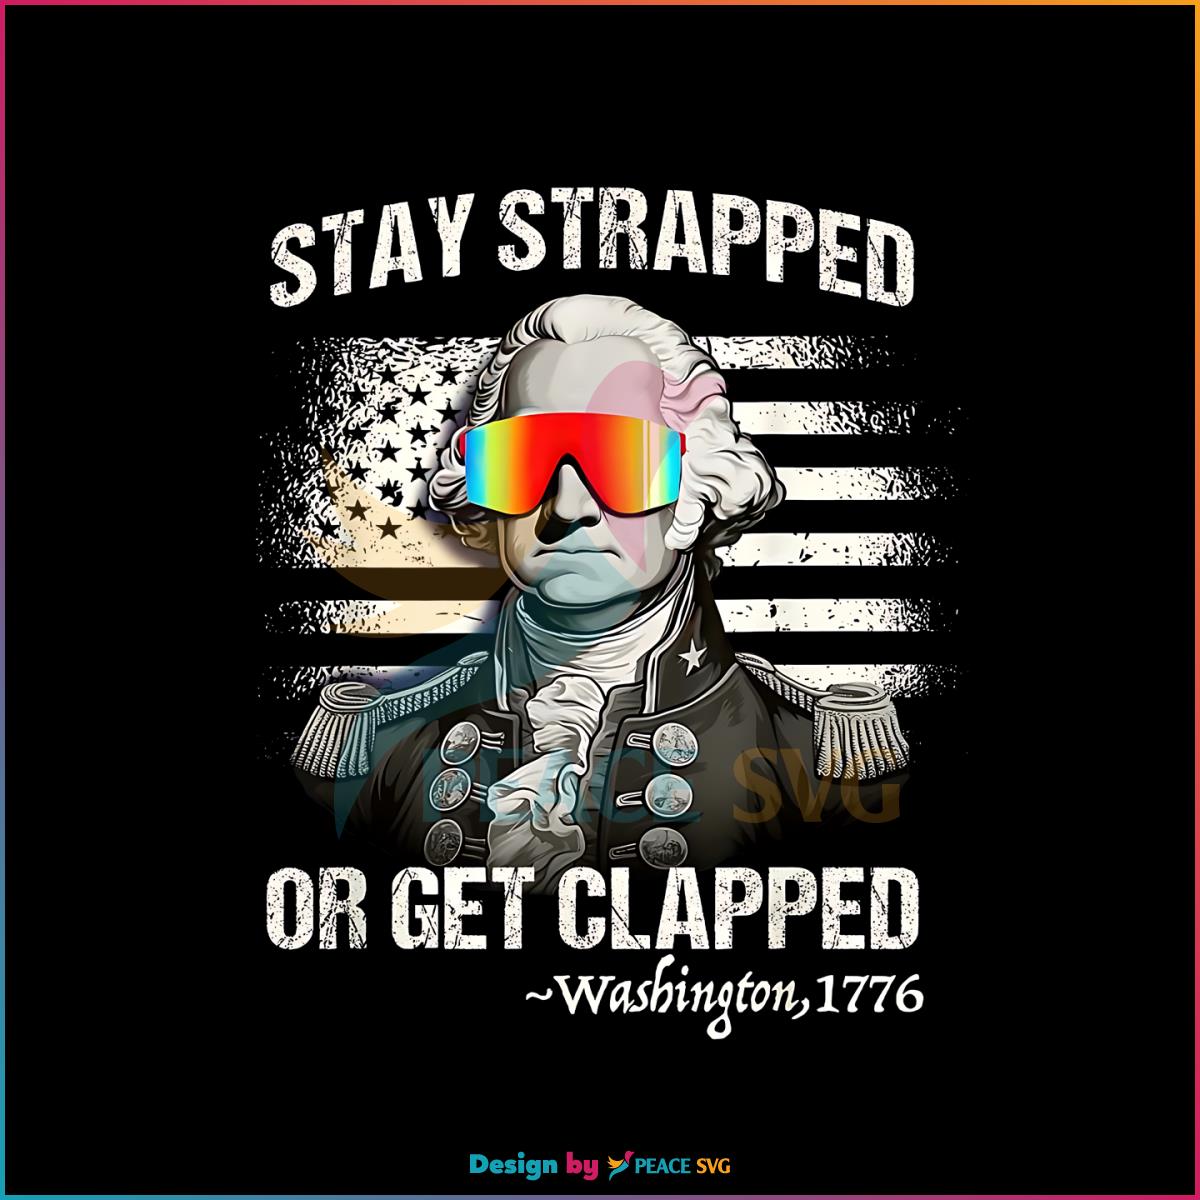 stay-strapped-get-clapped-washington-png-silhouette-file